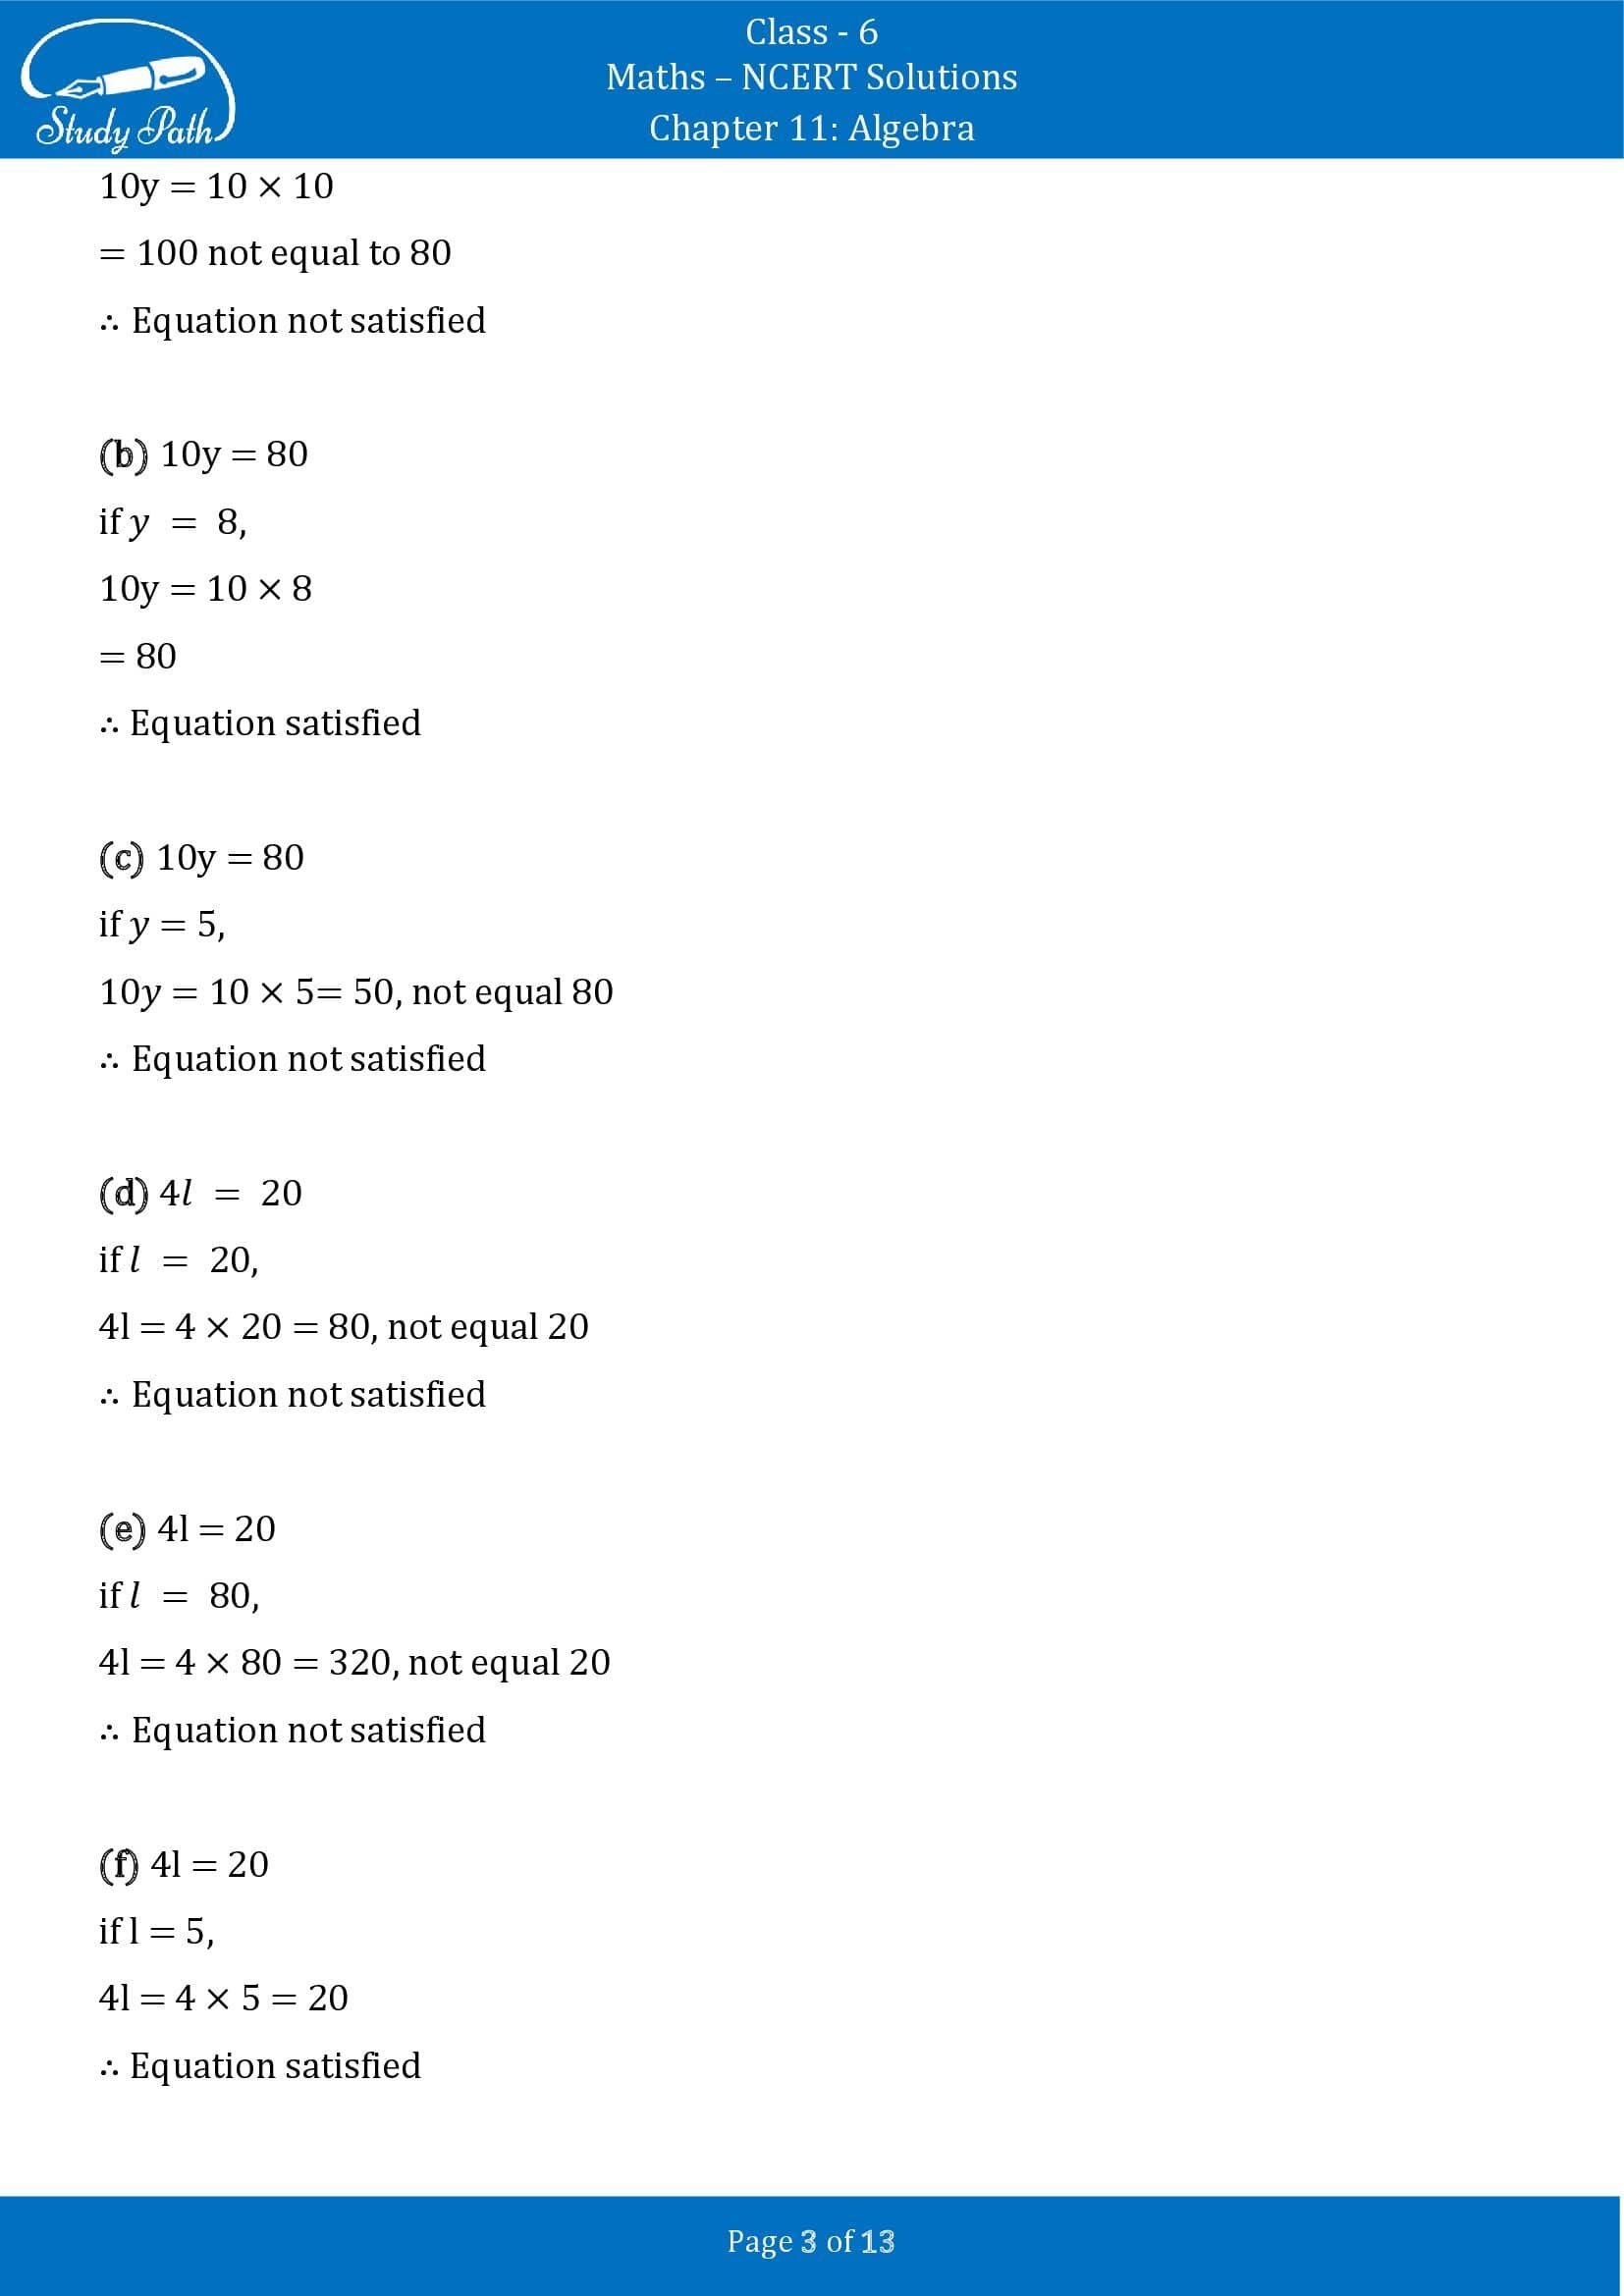 NCERT Solutions for Class 6 Maths Chapter 11 Algebra Exercise 11.5 00003